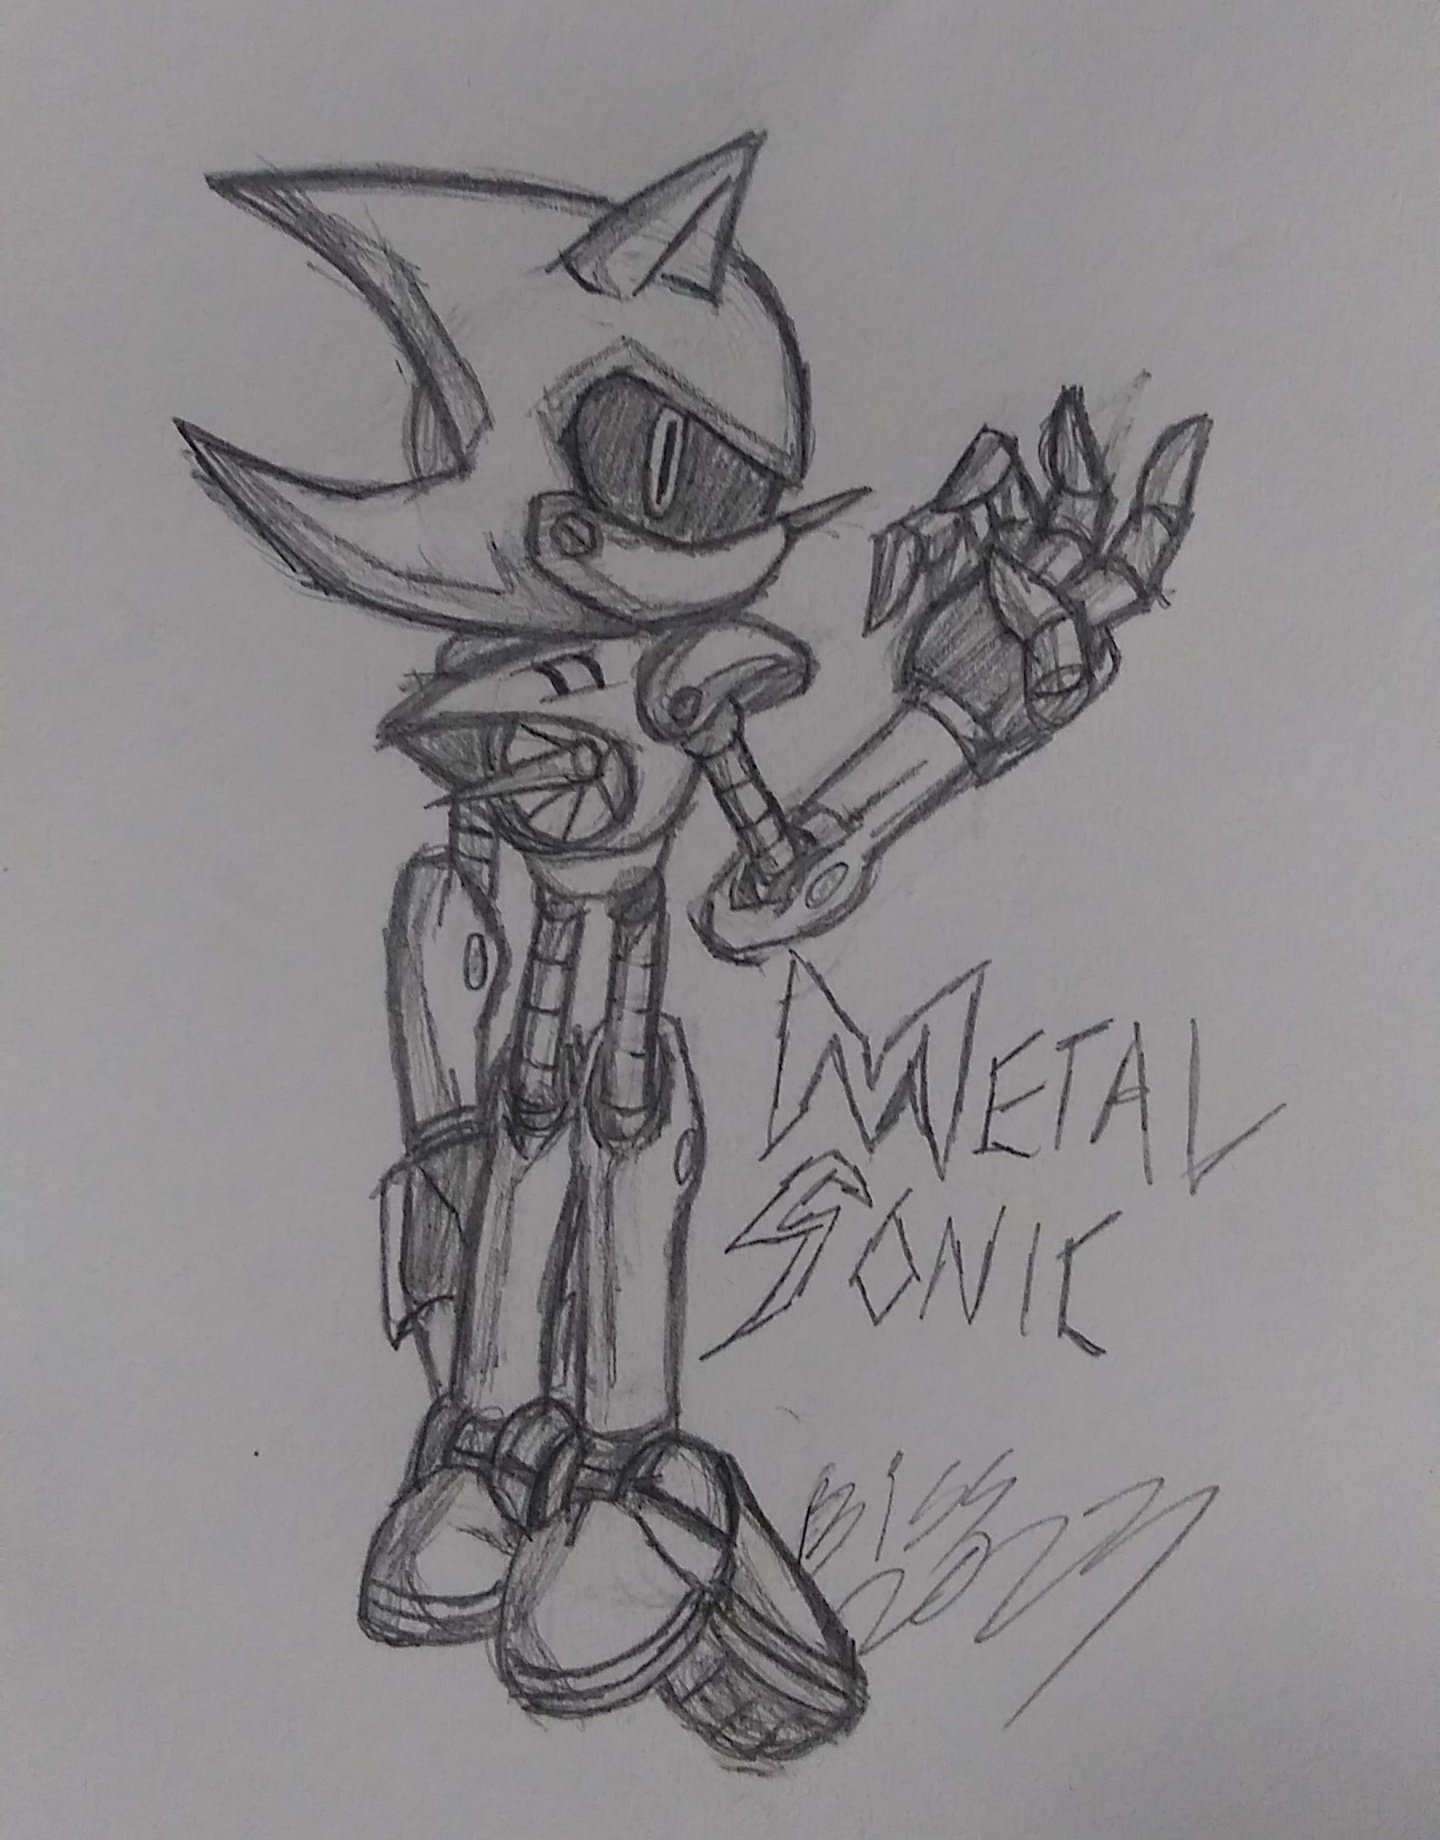 Biss (CEO of Metal Sonic) (@BissDraws9052) / X